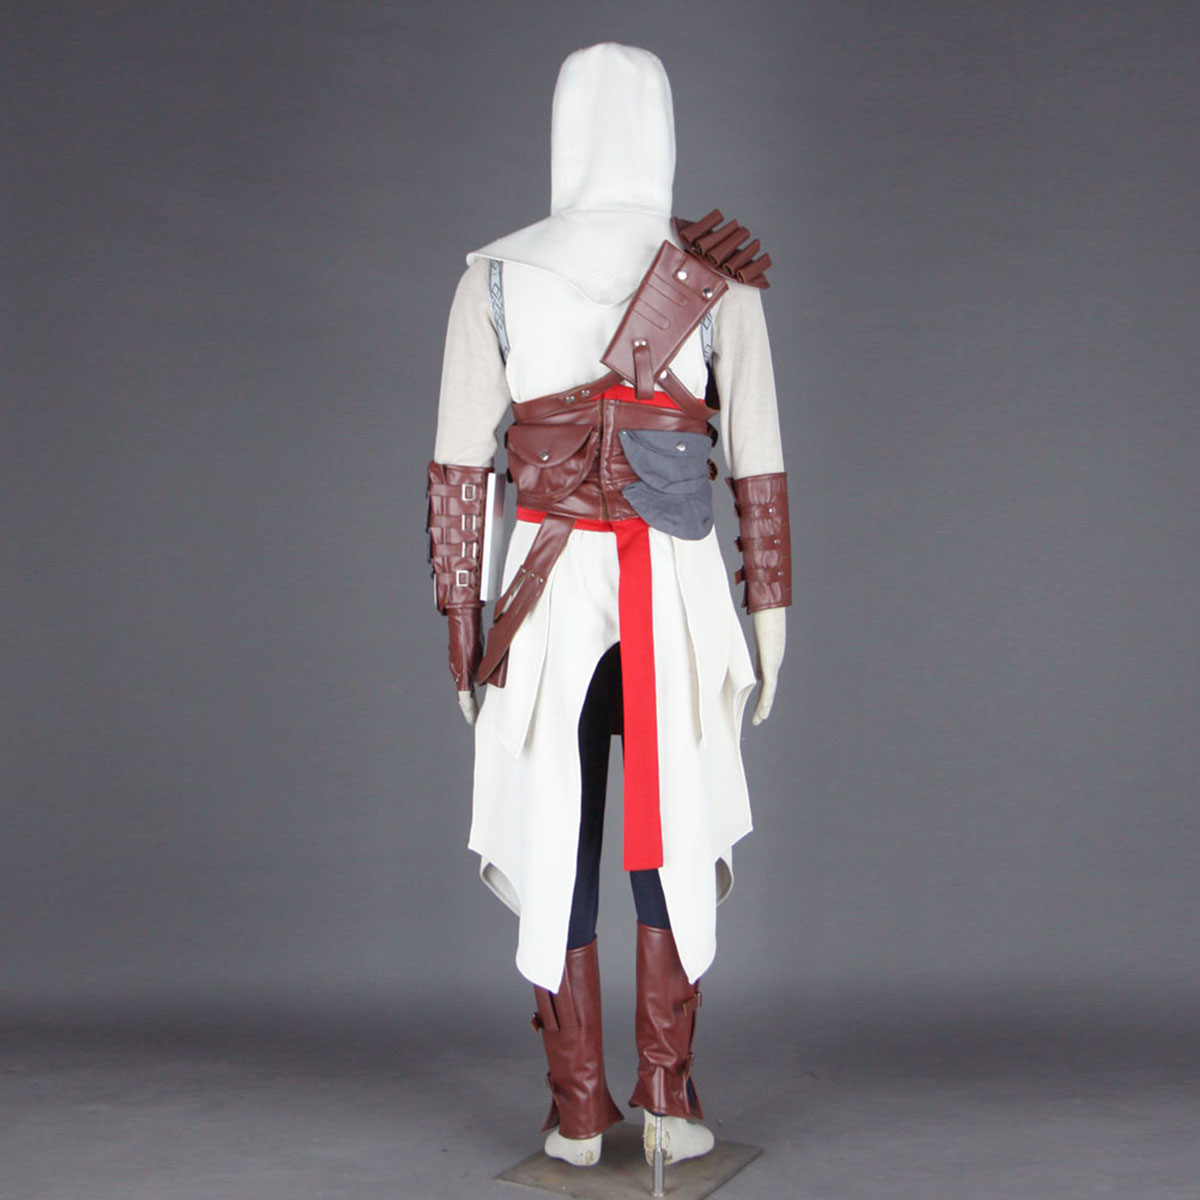 Assassin's Creed Assassin 1 Cosplay Costumes New Zealand Online Store